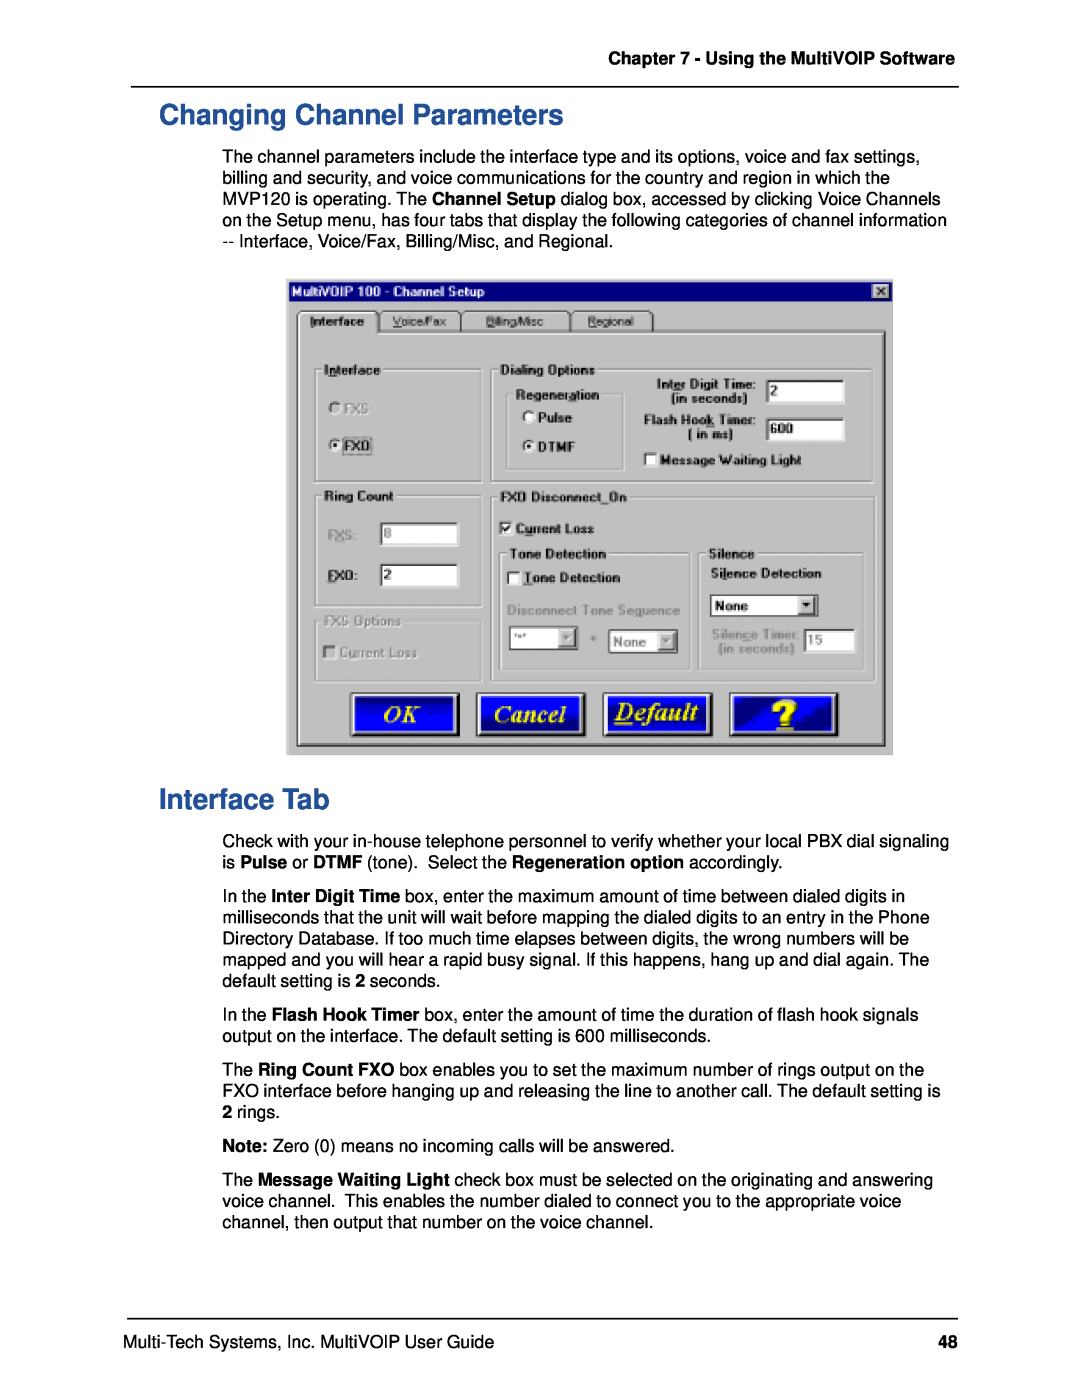 Multi-Tech Systems MVP120 manual Changing Channel Parameters, Interface Tab, Using the MultiVOIP Software 